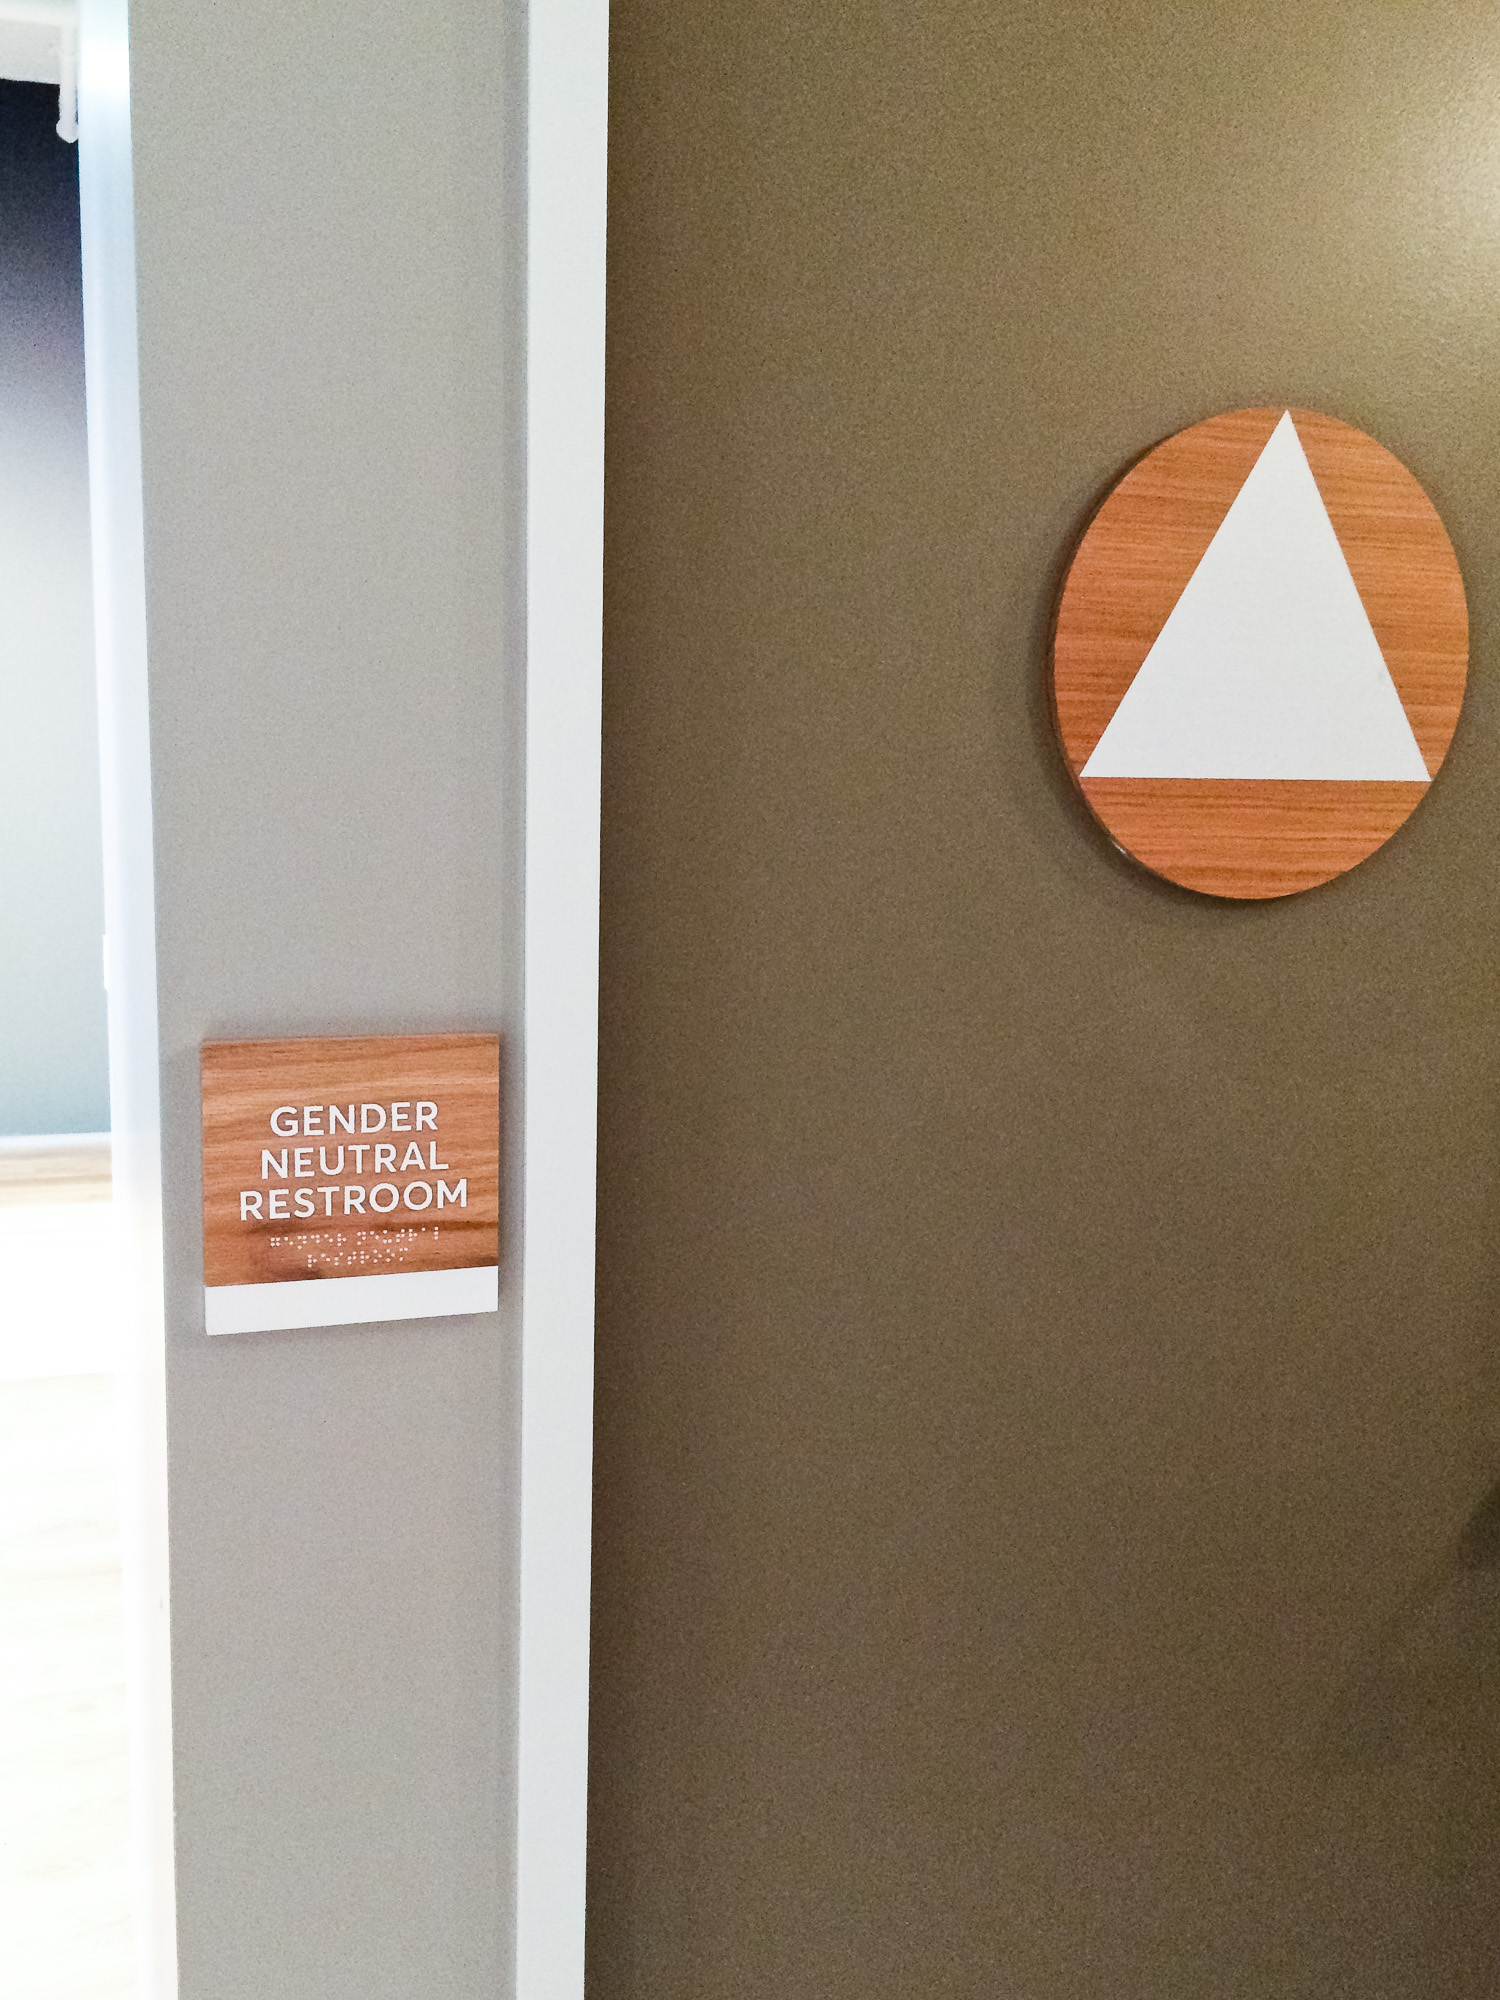 White-painted wood, California ADA signs for the office of Slack, a cloud-based set of proprietary team collaboration tools and services.